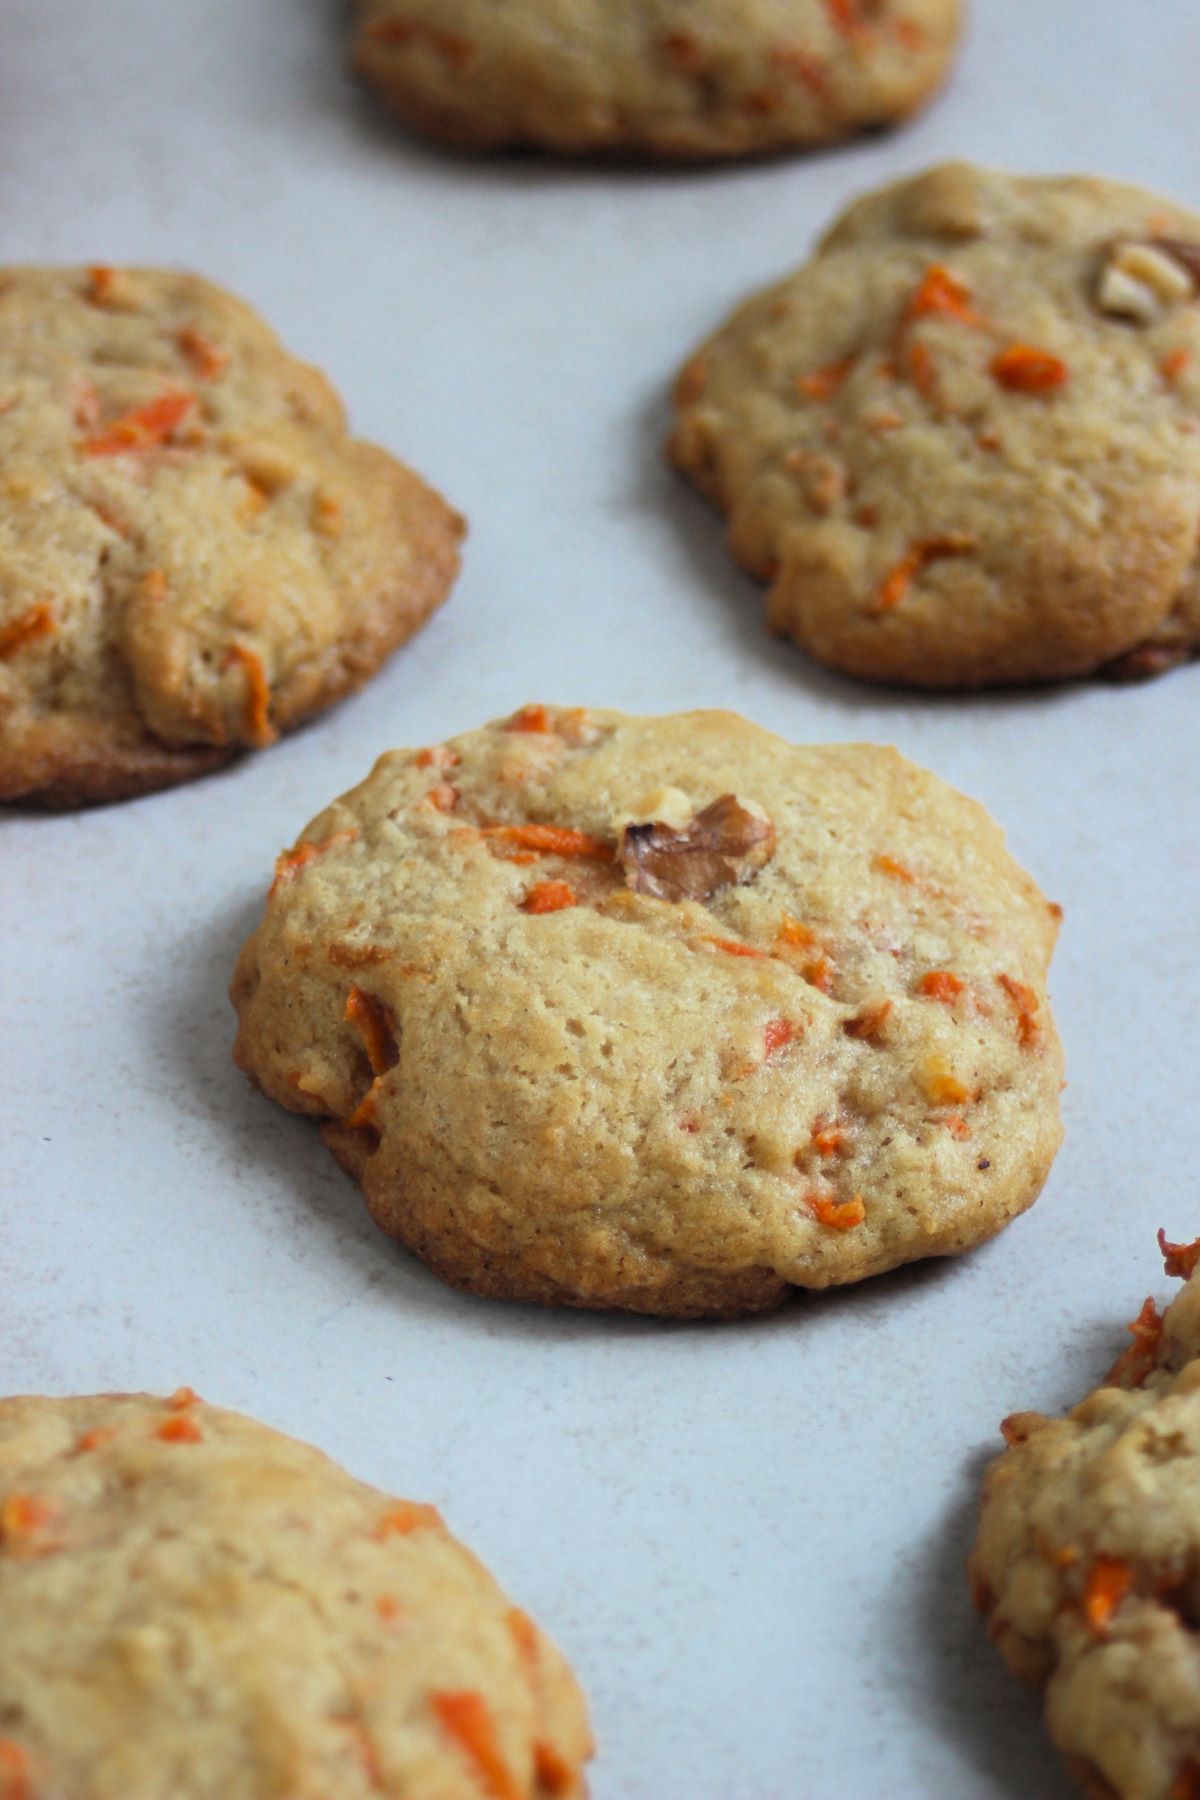 Carrot cake cookies on a white surface.